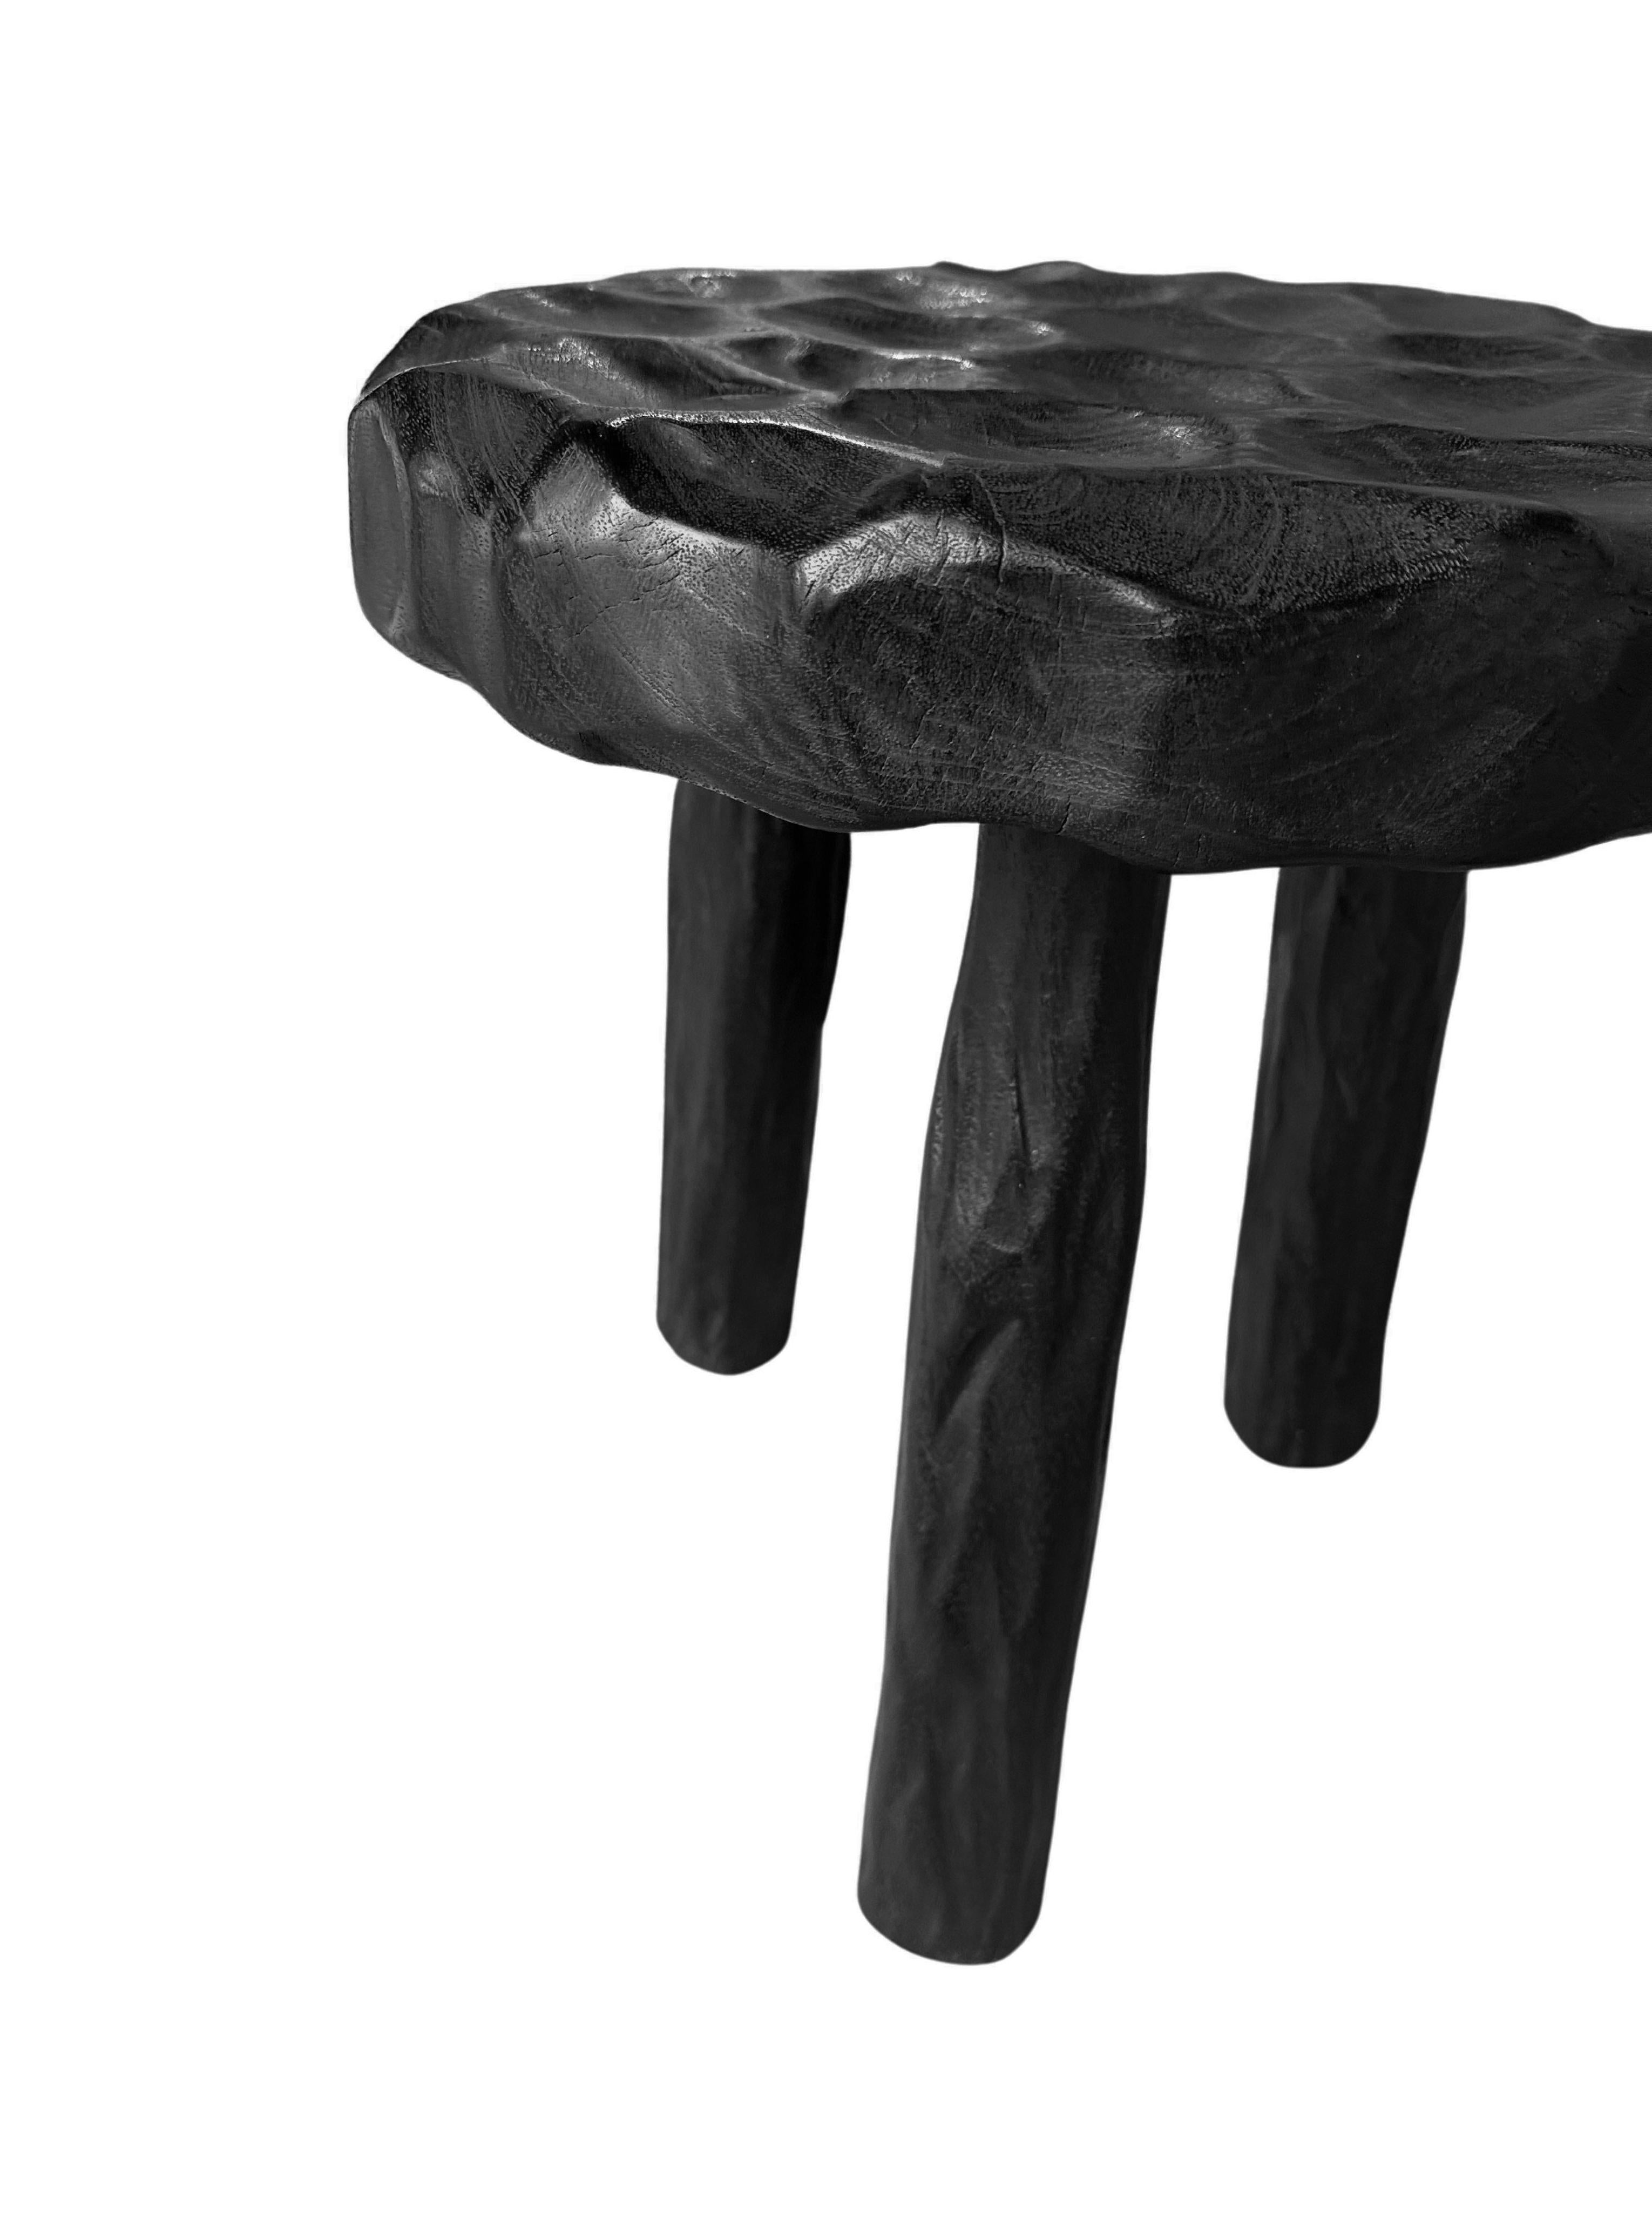 Hand-Crafted Sculptural Stool Solid Mango Wood, Hand-Hewn Detailing, Modern Organic For Sale